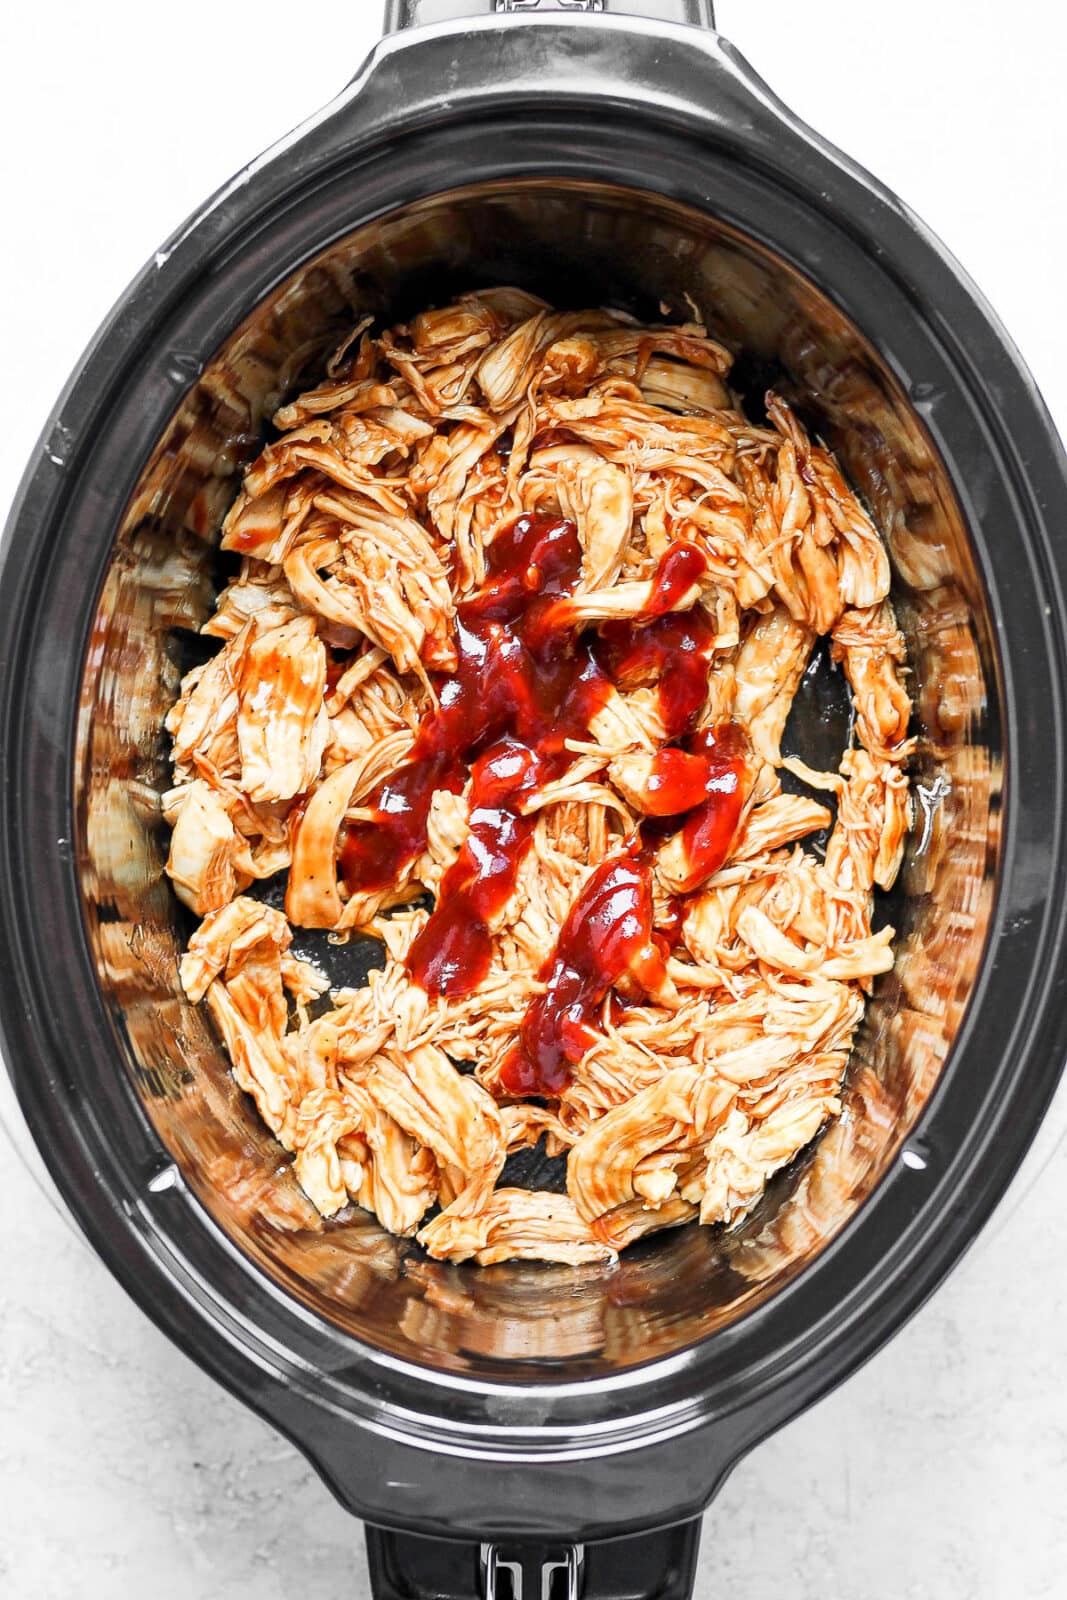 Shredded BBQ chicken in a crockpot with some more added BBQ sauce.